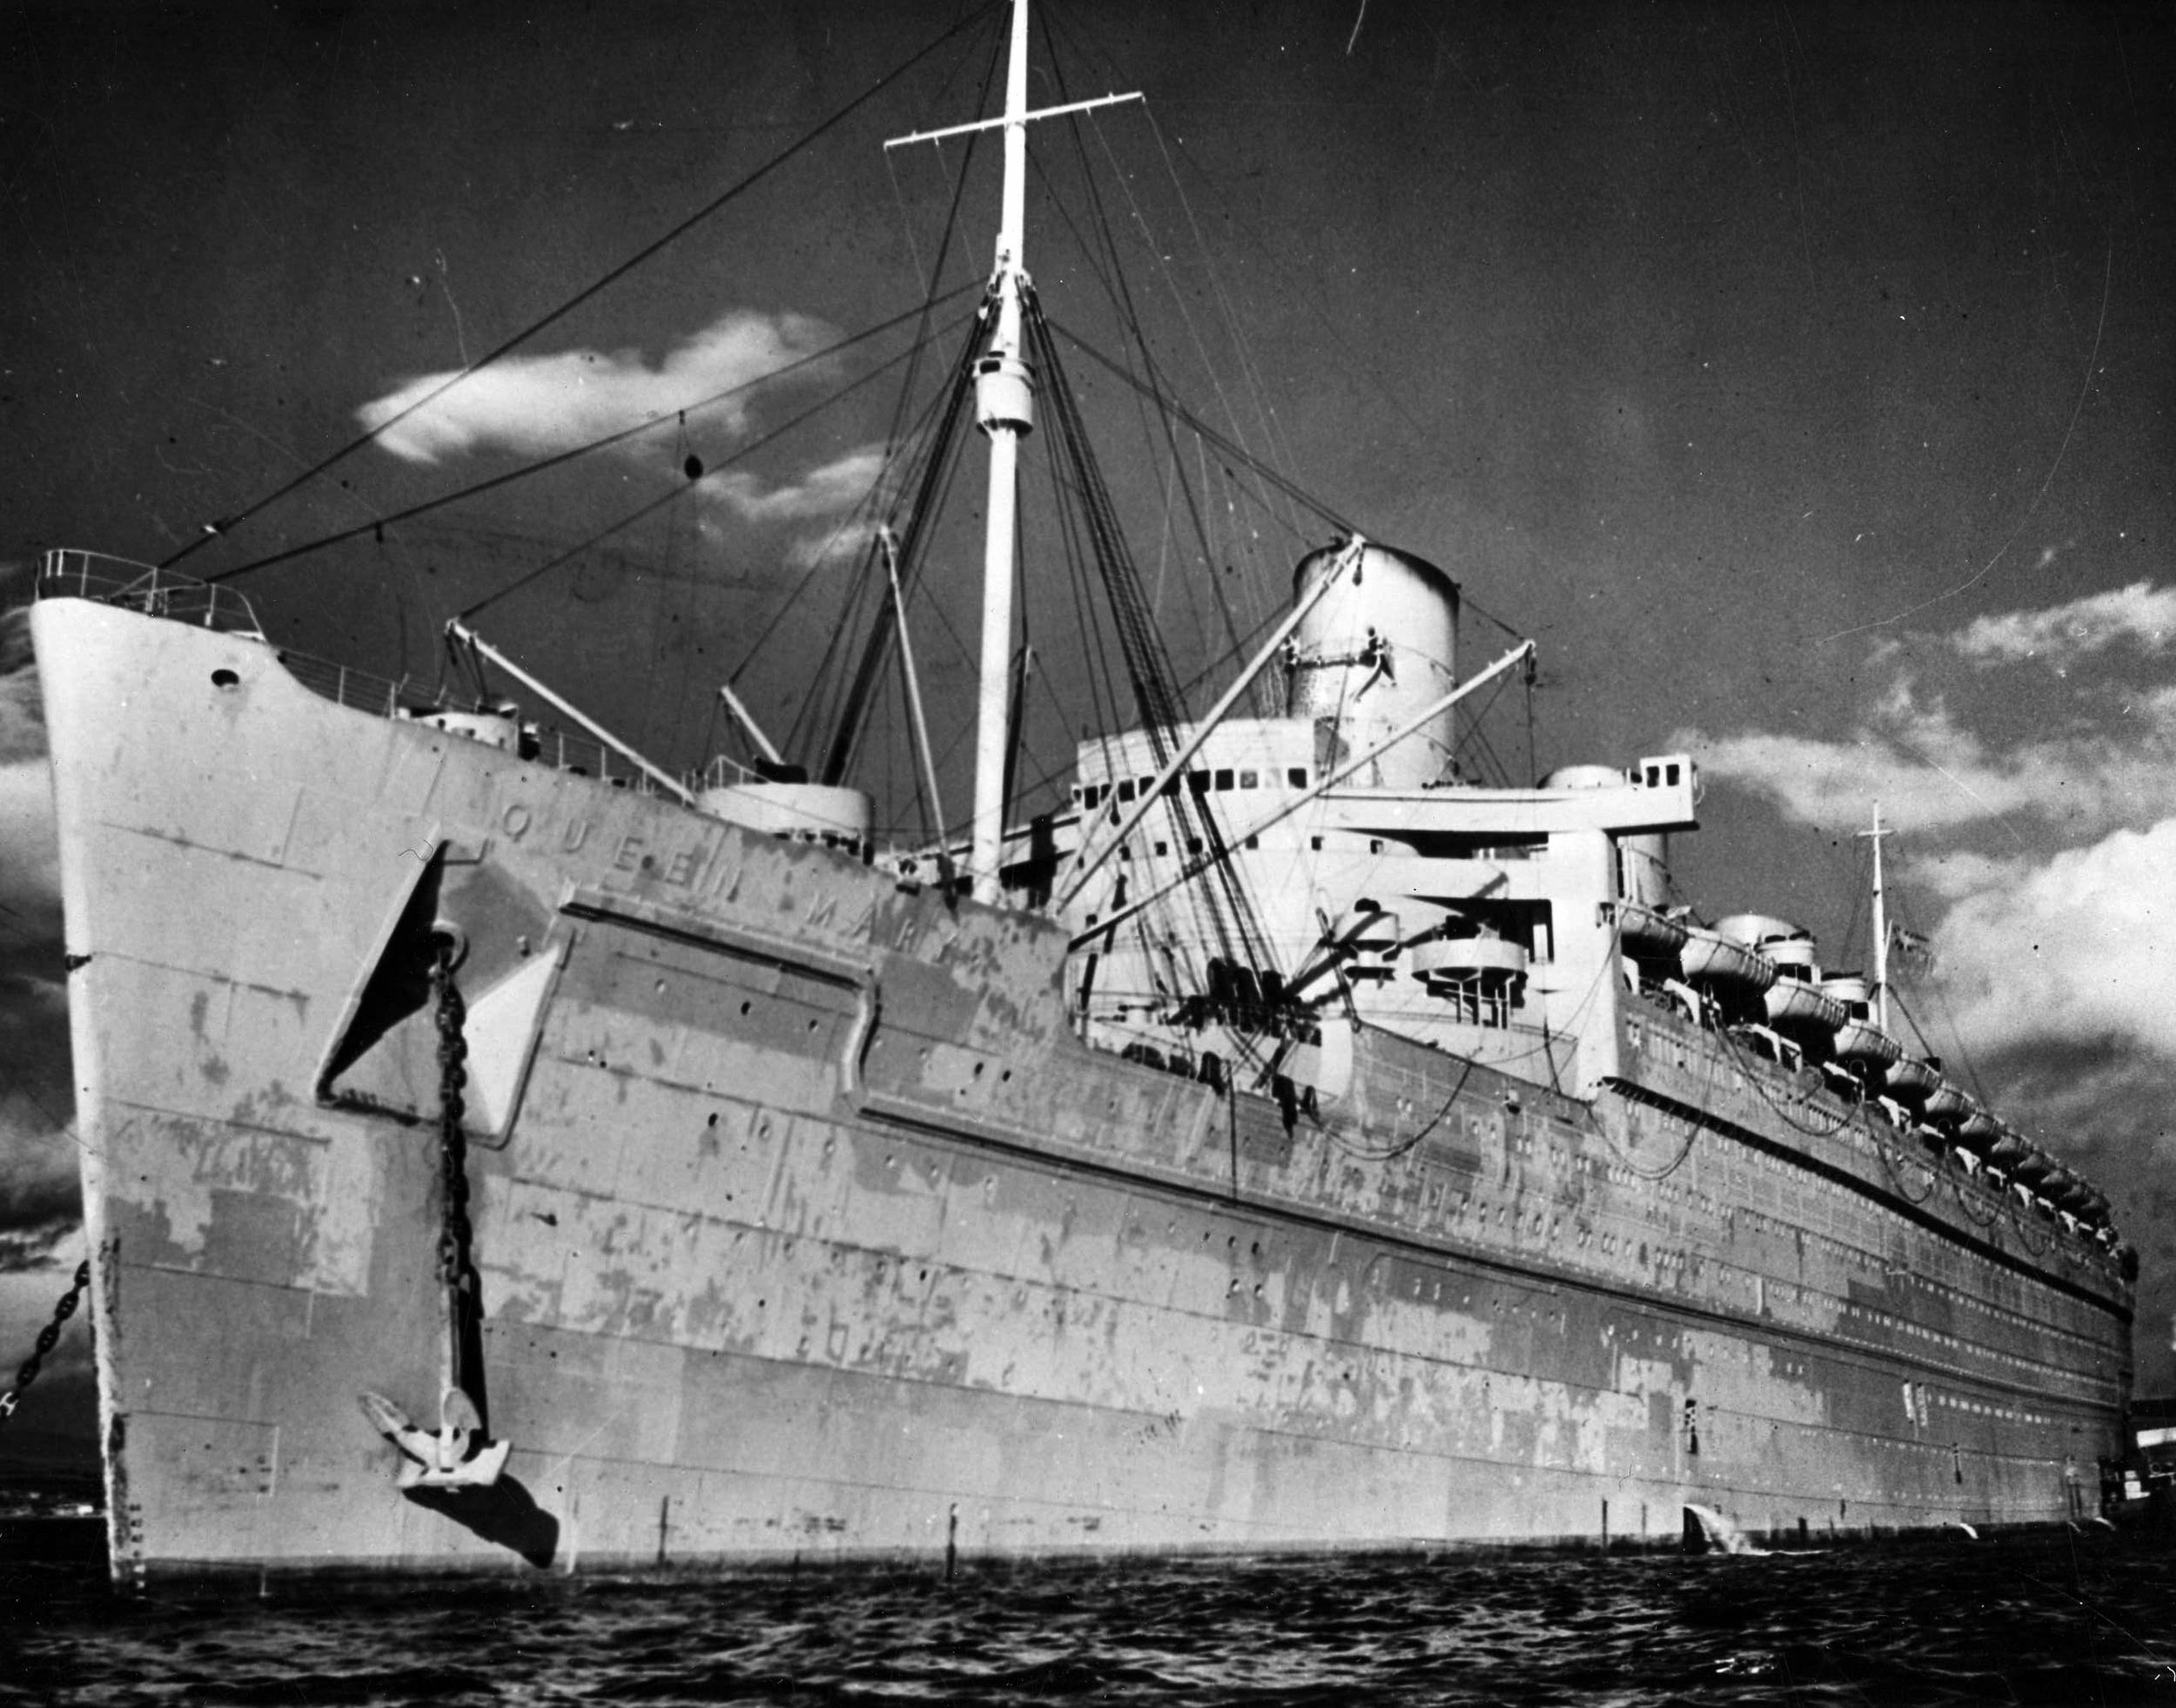 Painted in dull wartime colors, the Queen Mary looks every bit the troop ship she was reconditioned to be in this December 1944 photo. During the war, the luxury liner transported thousands of troops from North America to Europe.